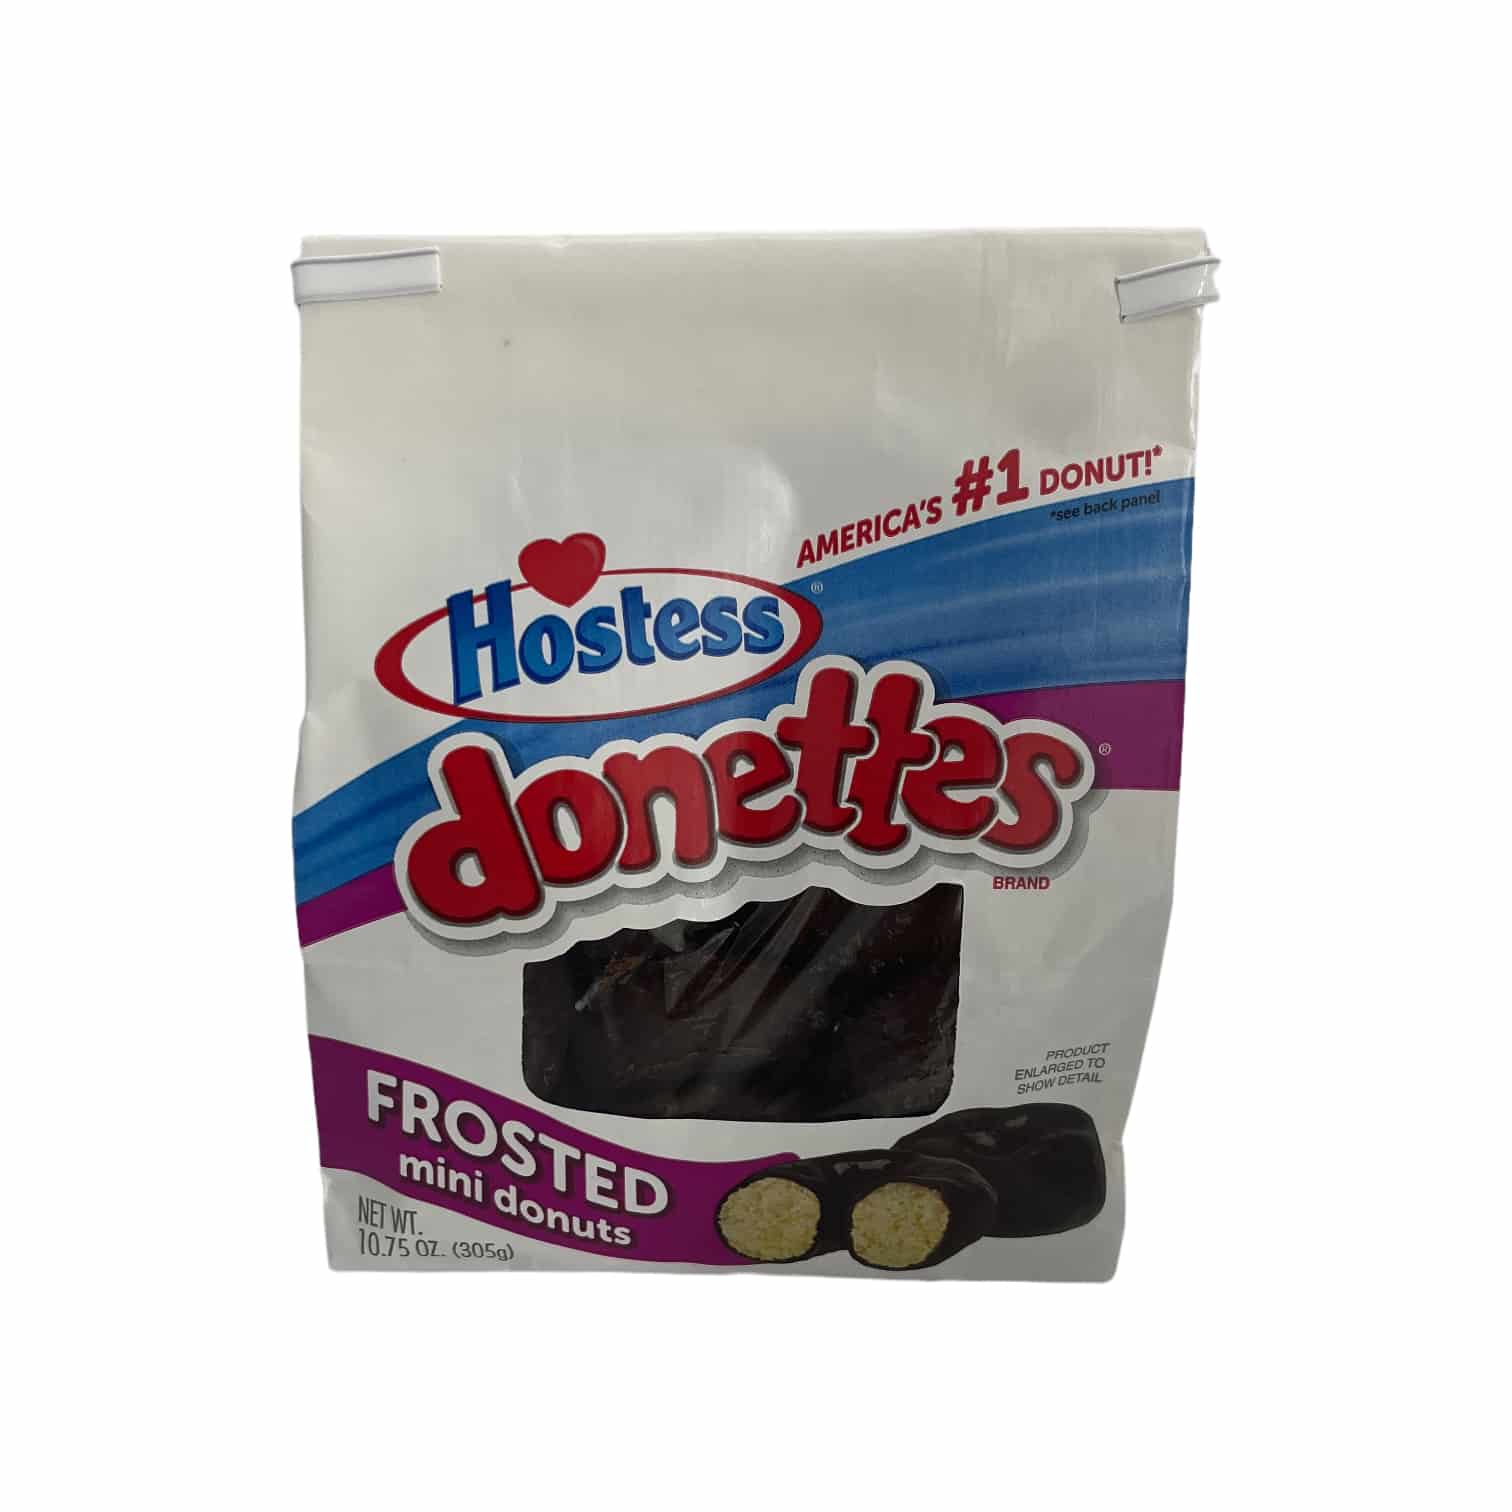 Hostess Donettes frosted 305 g